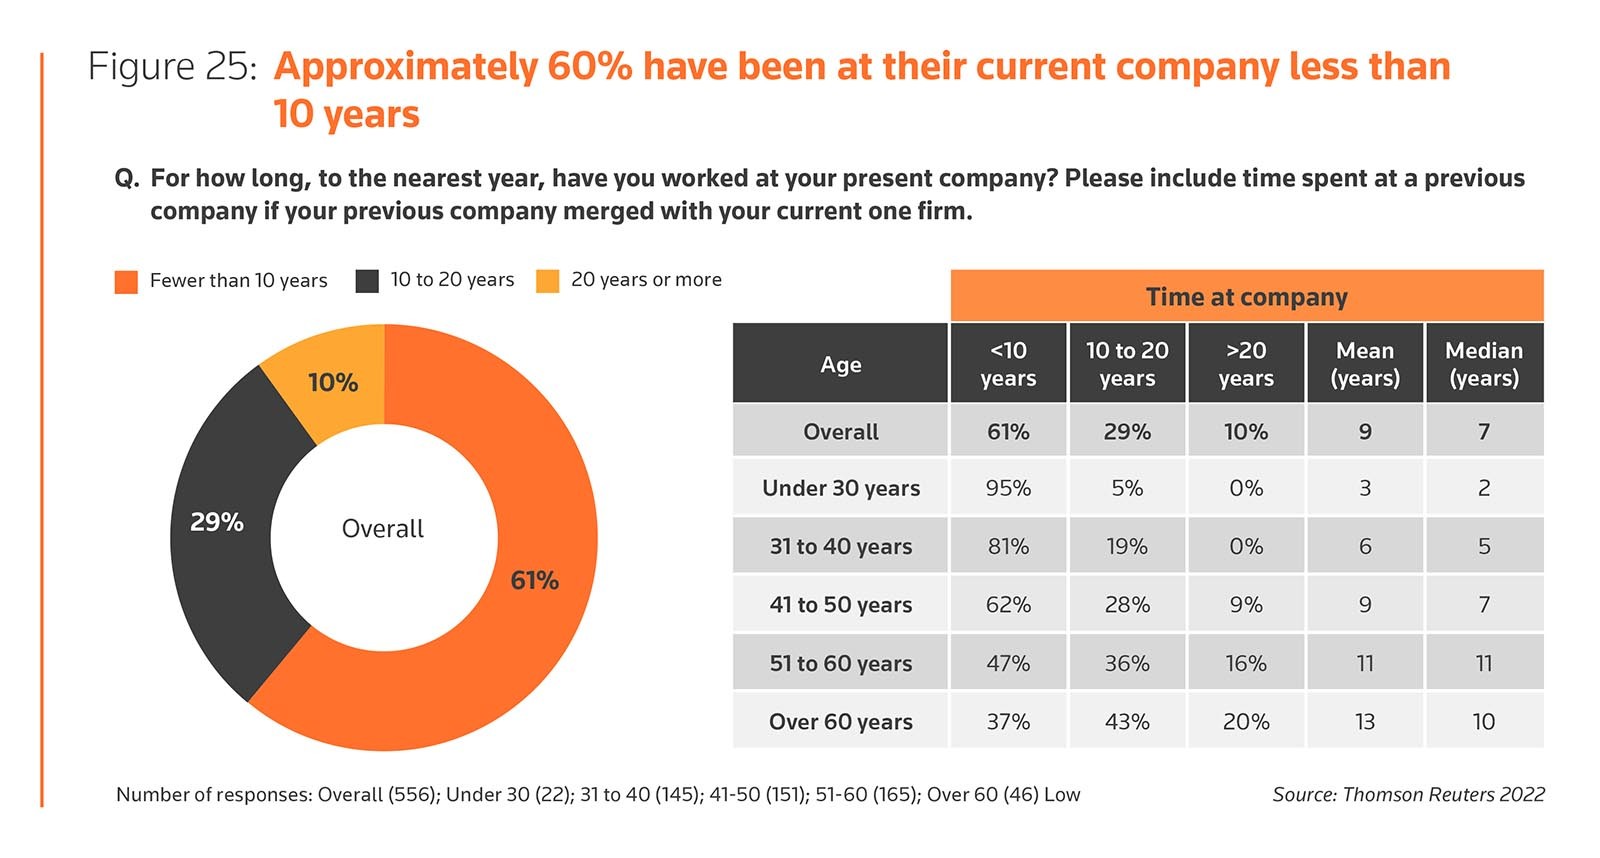 Figure 25: Approximately 60% have been at their current company less than 10 years